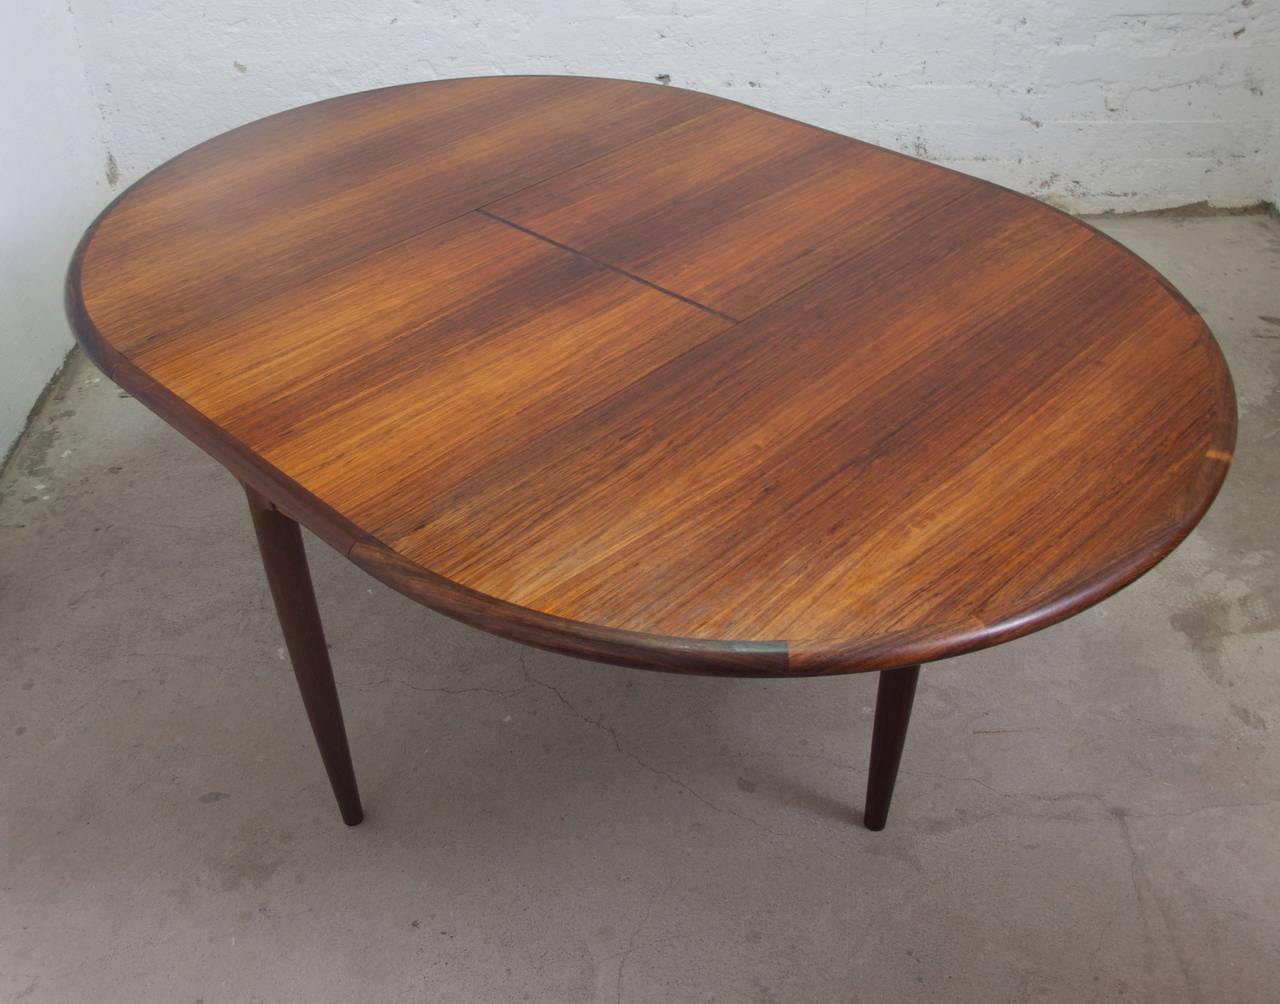 Scandinavian Modern Extendable Dining Table by Niels O. Møller No. 15 Danish Rosewood, 1960s